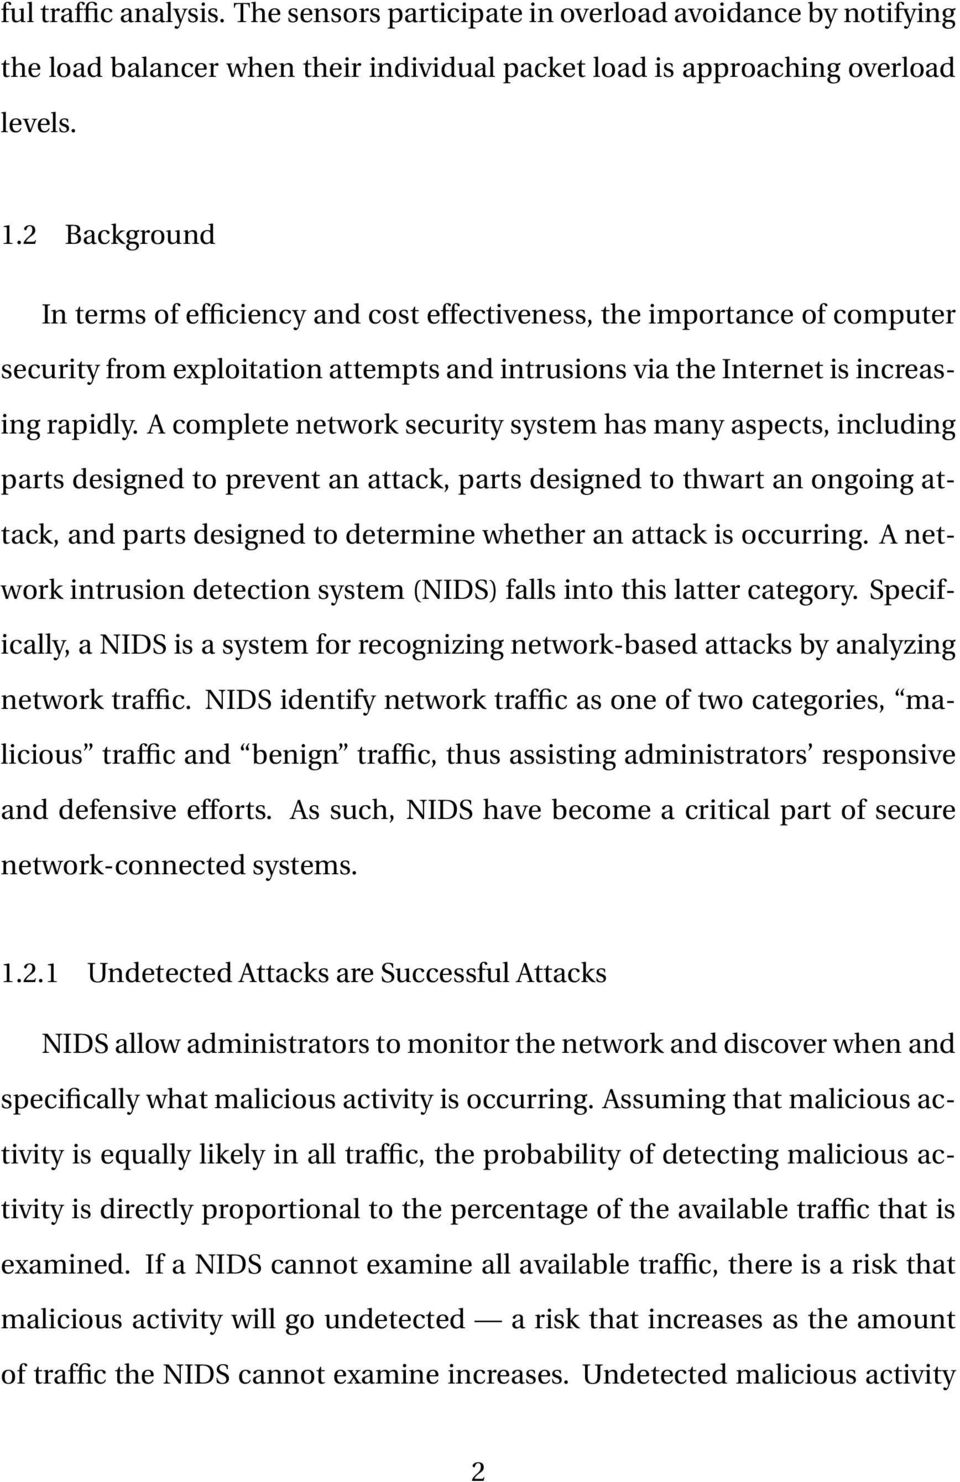 A complete network security system has many aspects, including parts designed to prevent an attack, parts designed to thwart an ongoing attack, and parts designed to determine whether an attack is